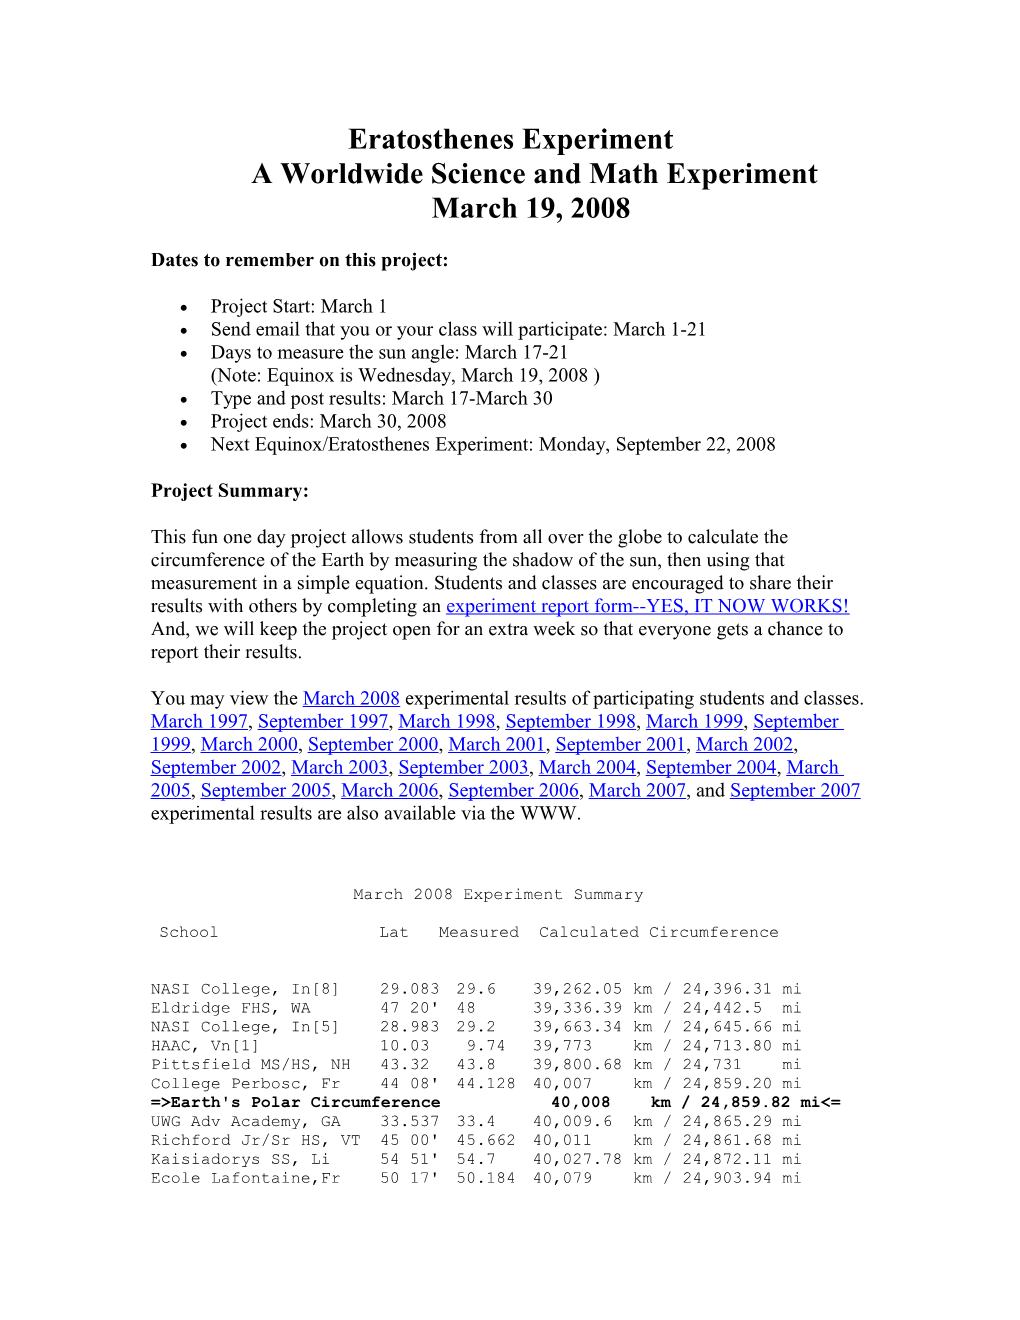 Eratosthenes Experimenta Worldwide Science and Math Experimentmarch 19, 2008